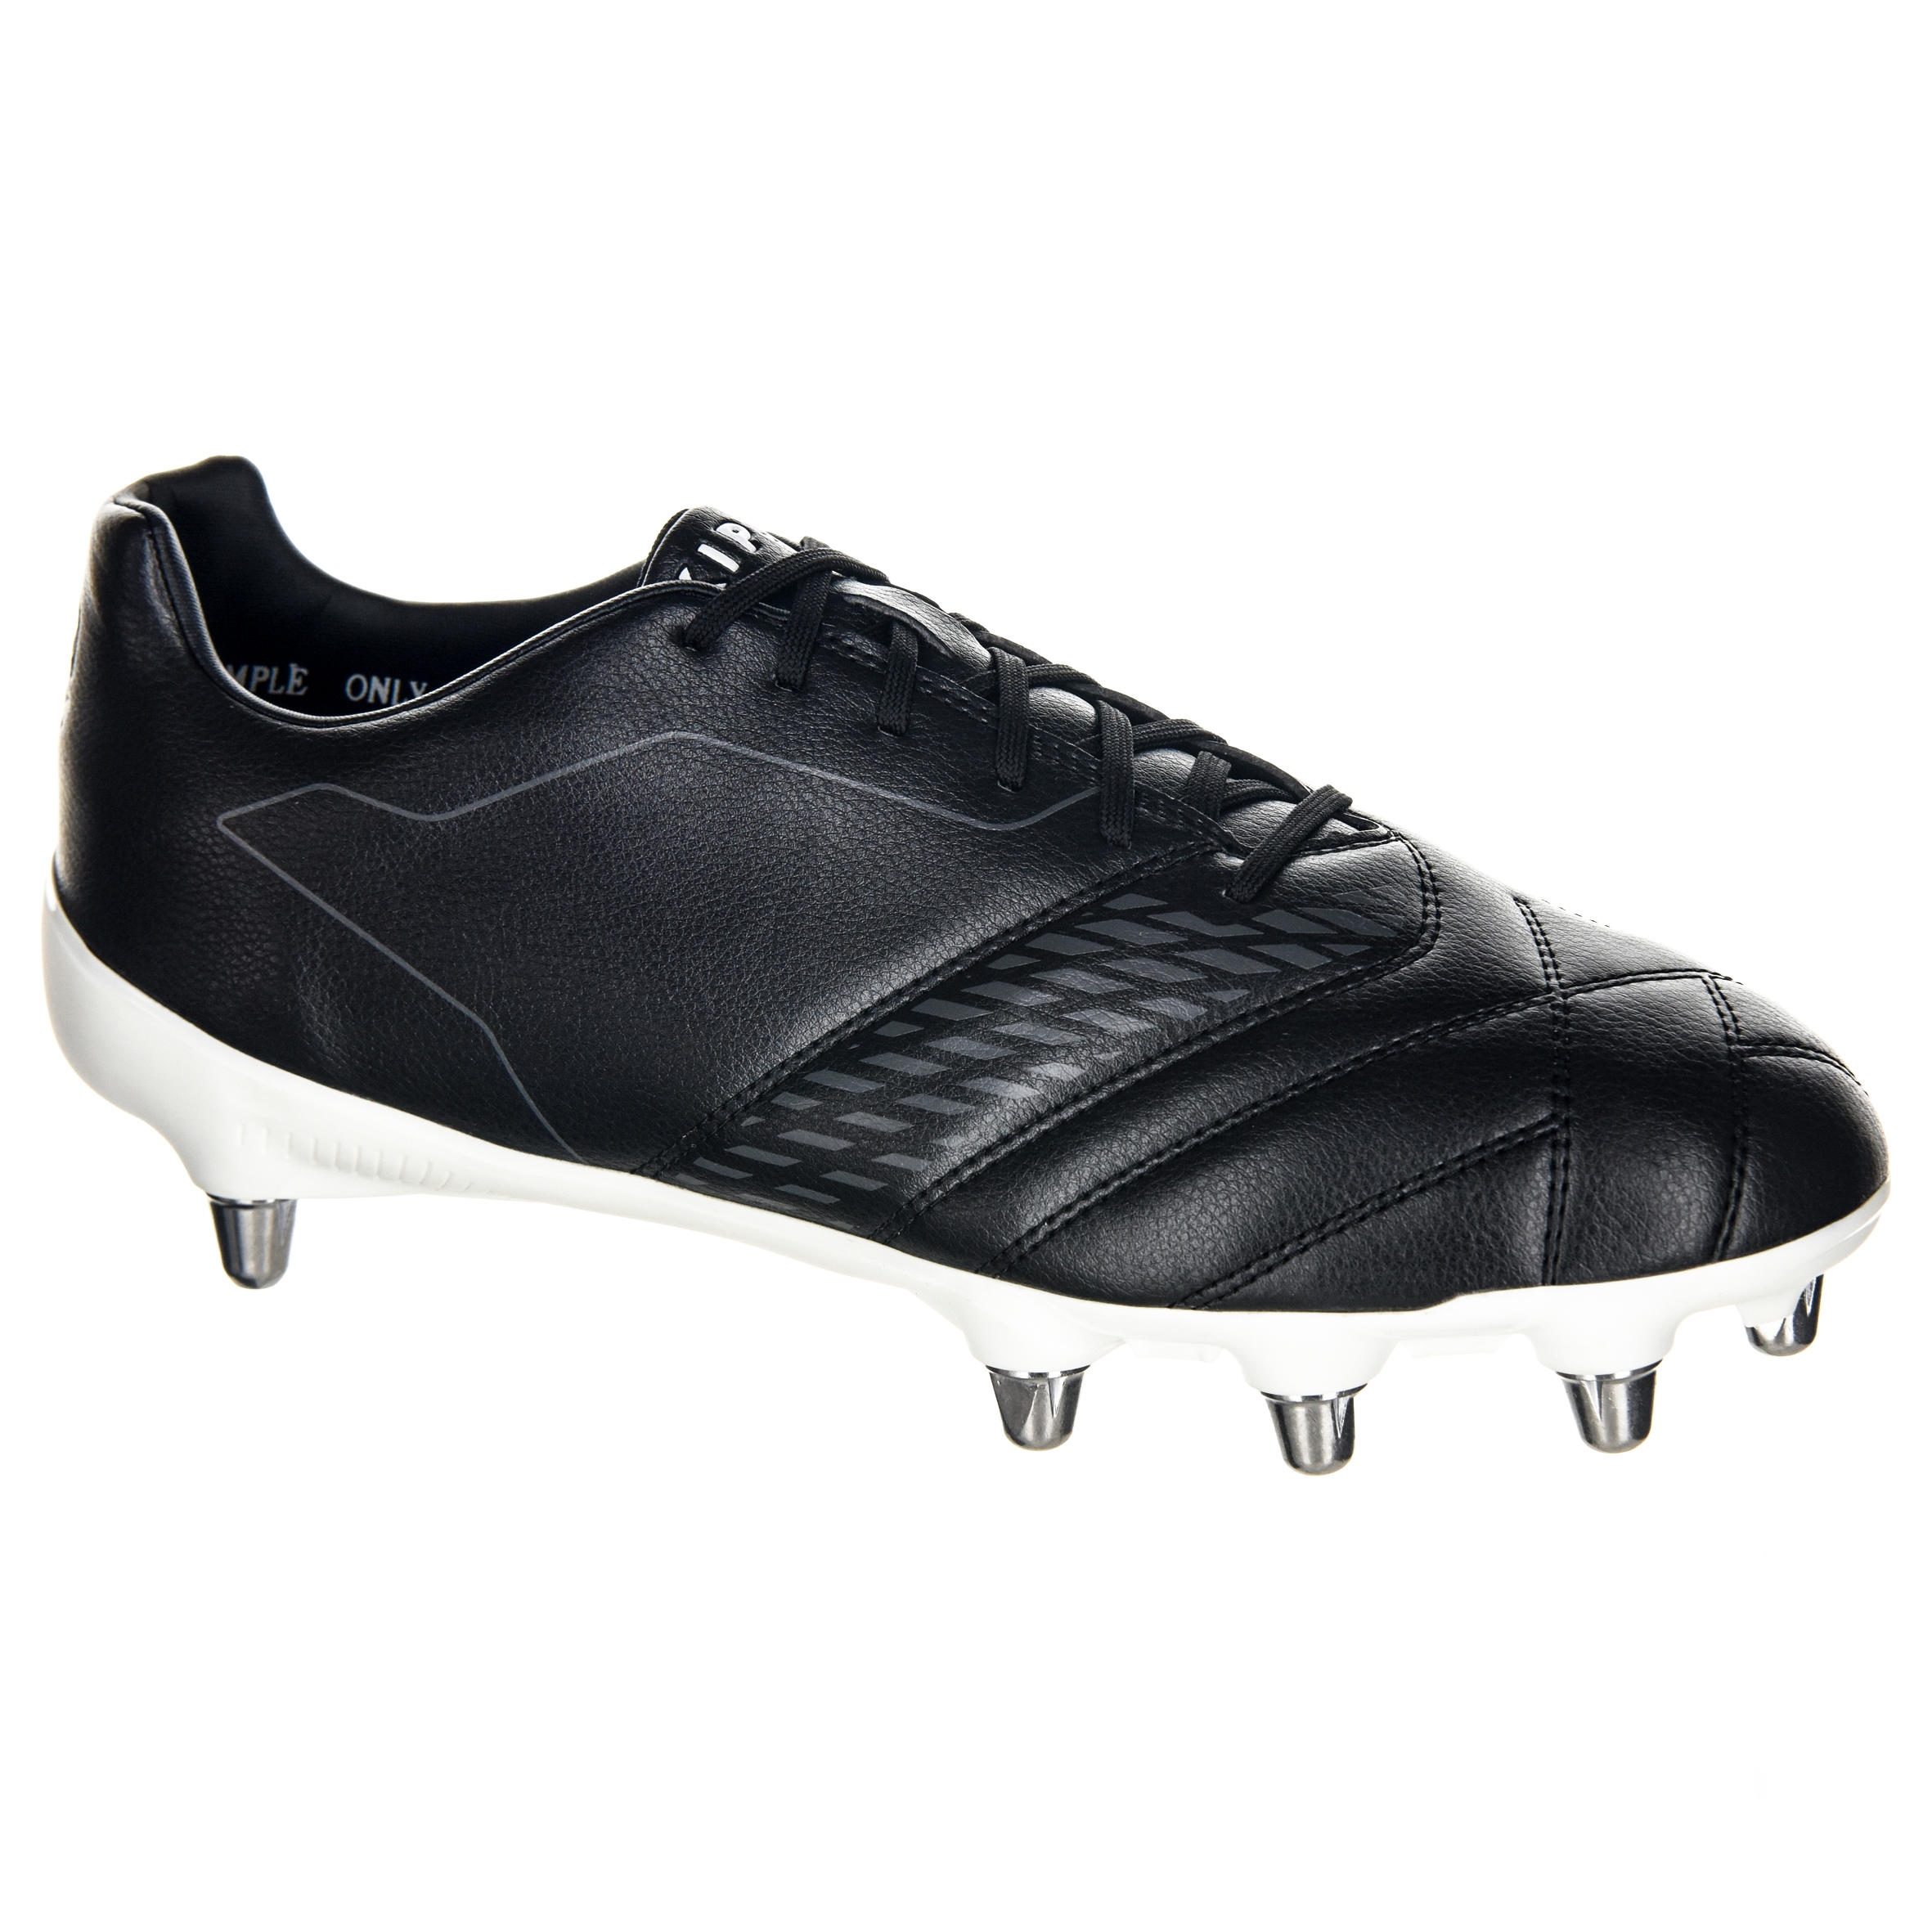 moulded stud rugby boots